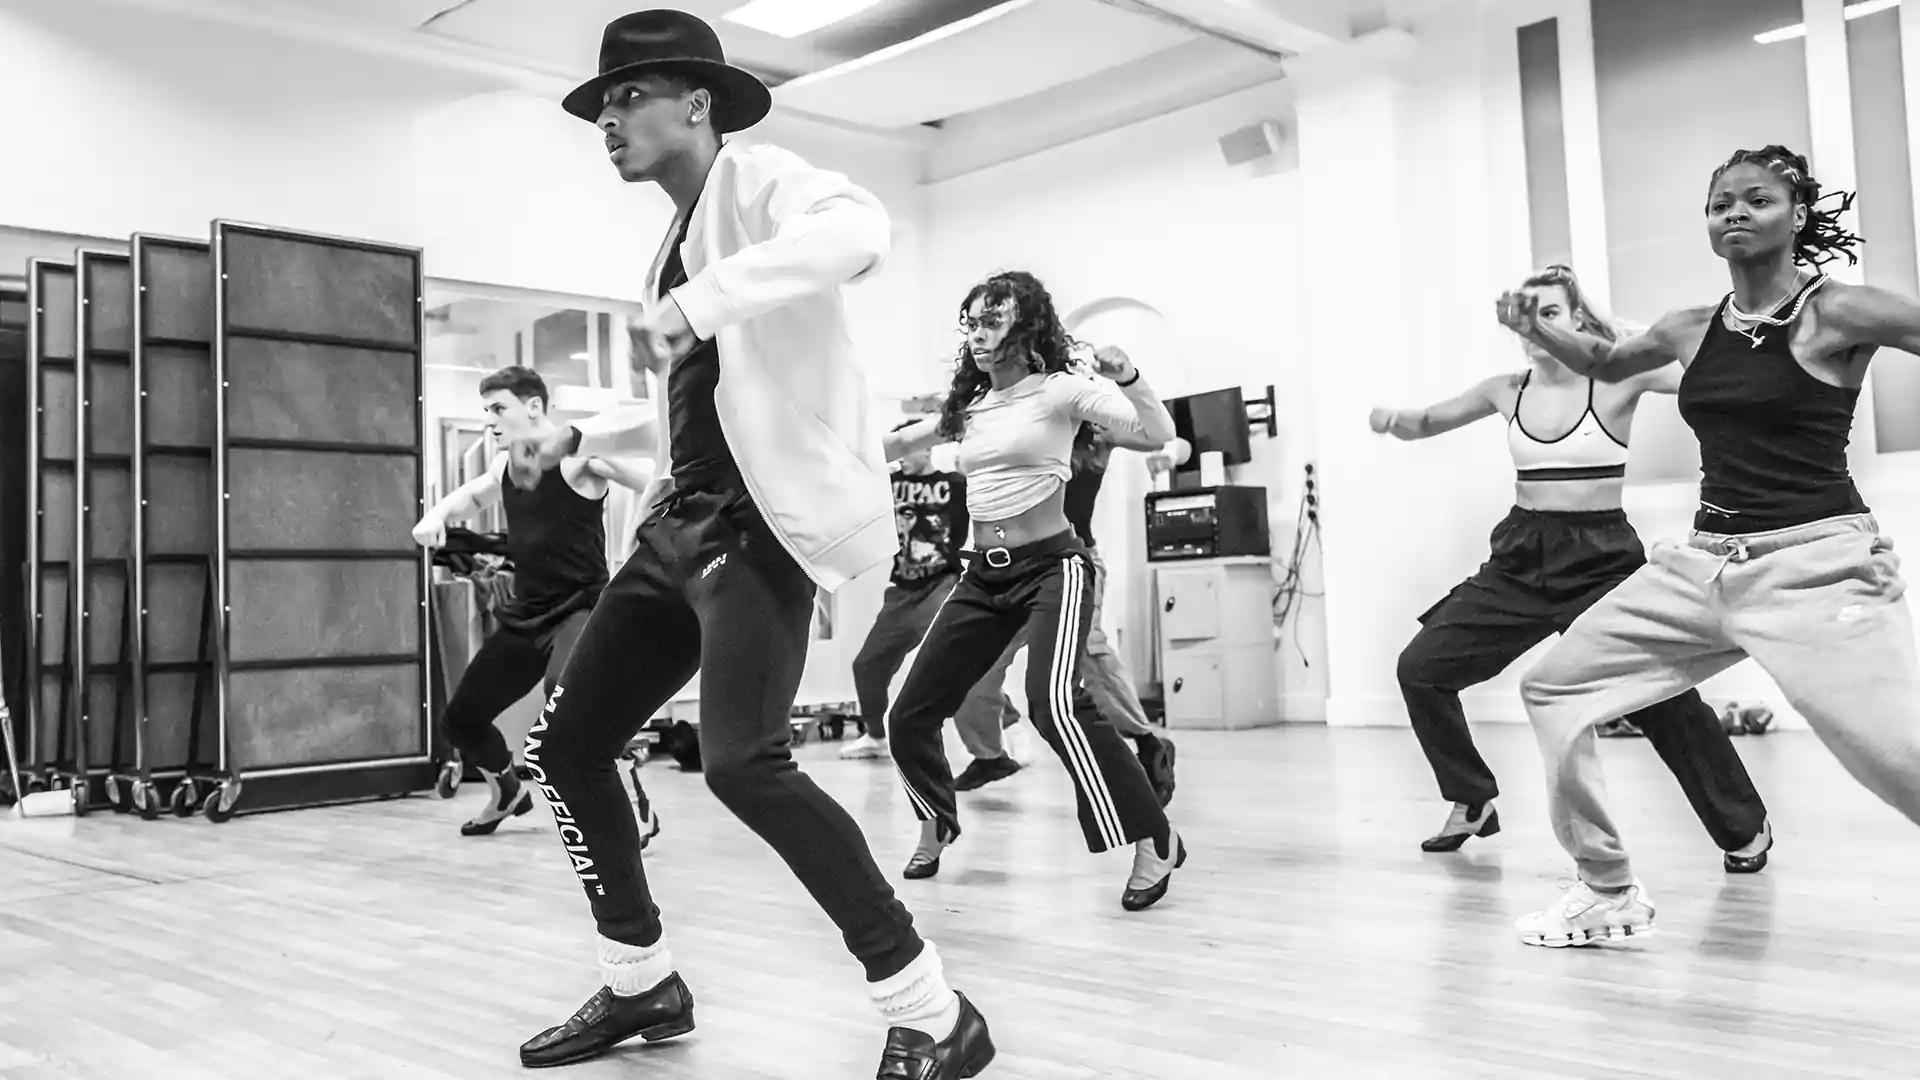 MJ Rehearsals. Photography by Johan Persson